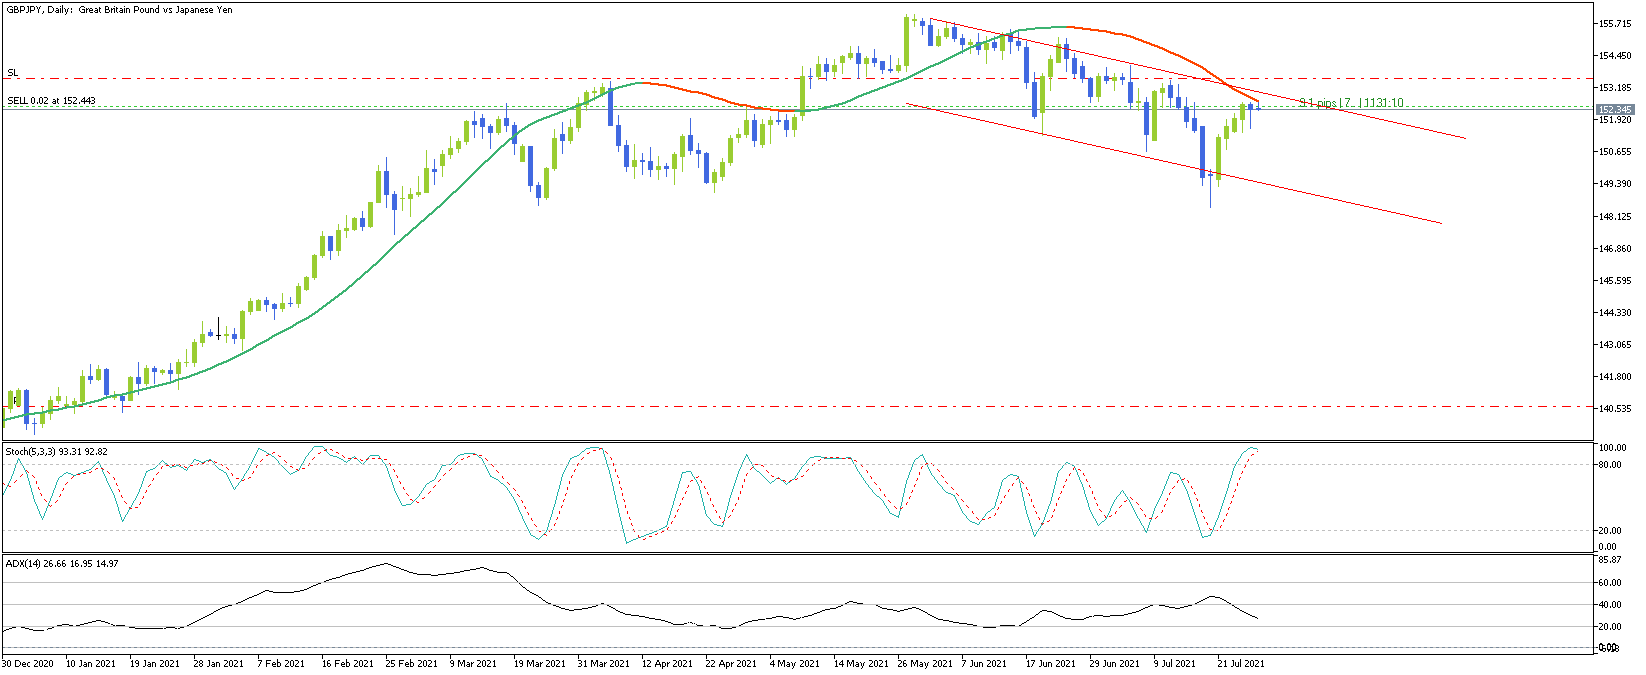 GBP/JPY D1 Price Action, Downtrend, Declining Channel, Indicators